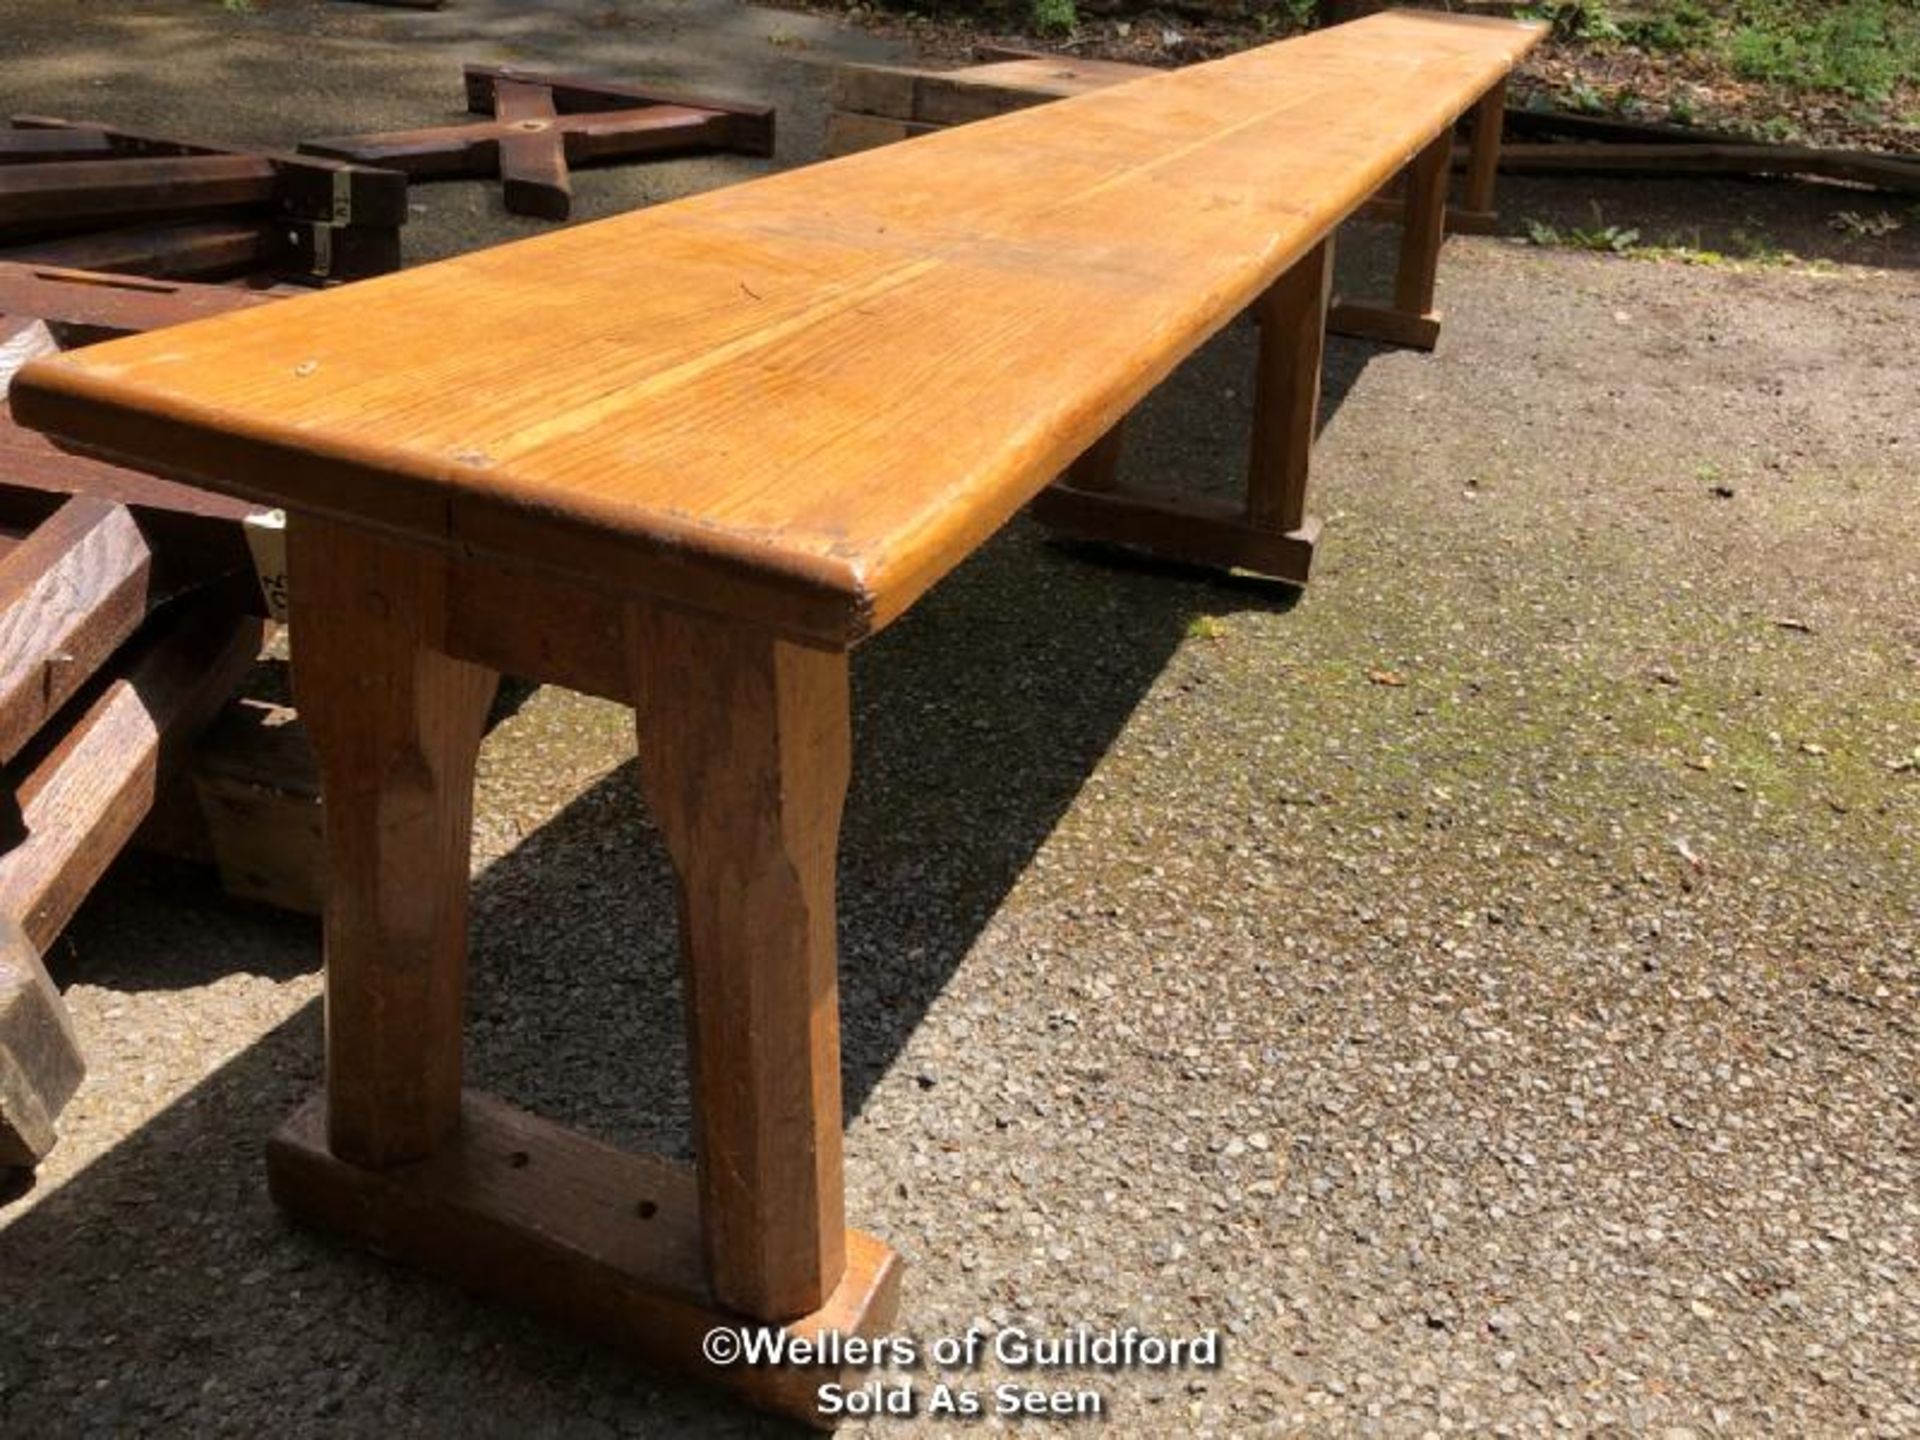 *OAK GYMNASIUM BENCH WITH 4 FEET - 3.5M L - Image 2 of 3